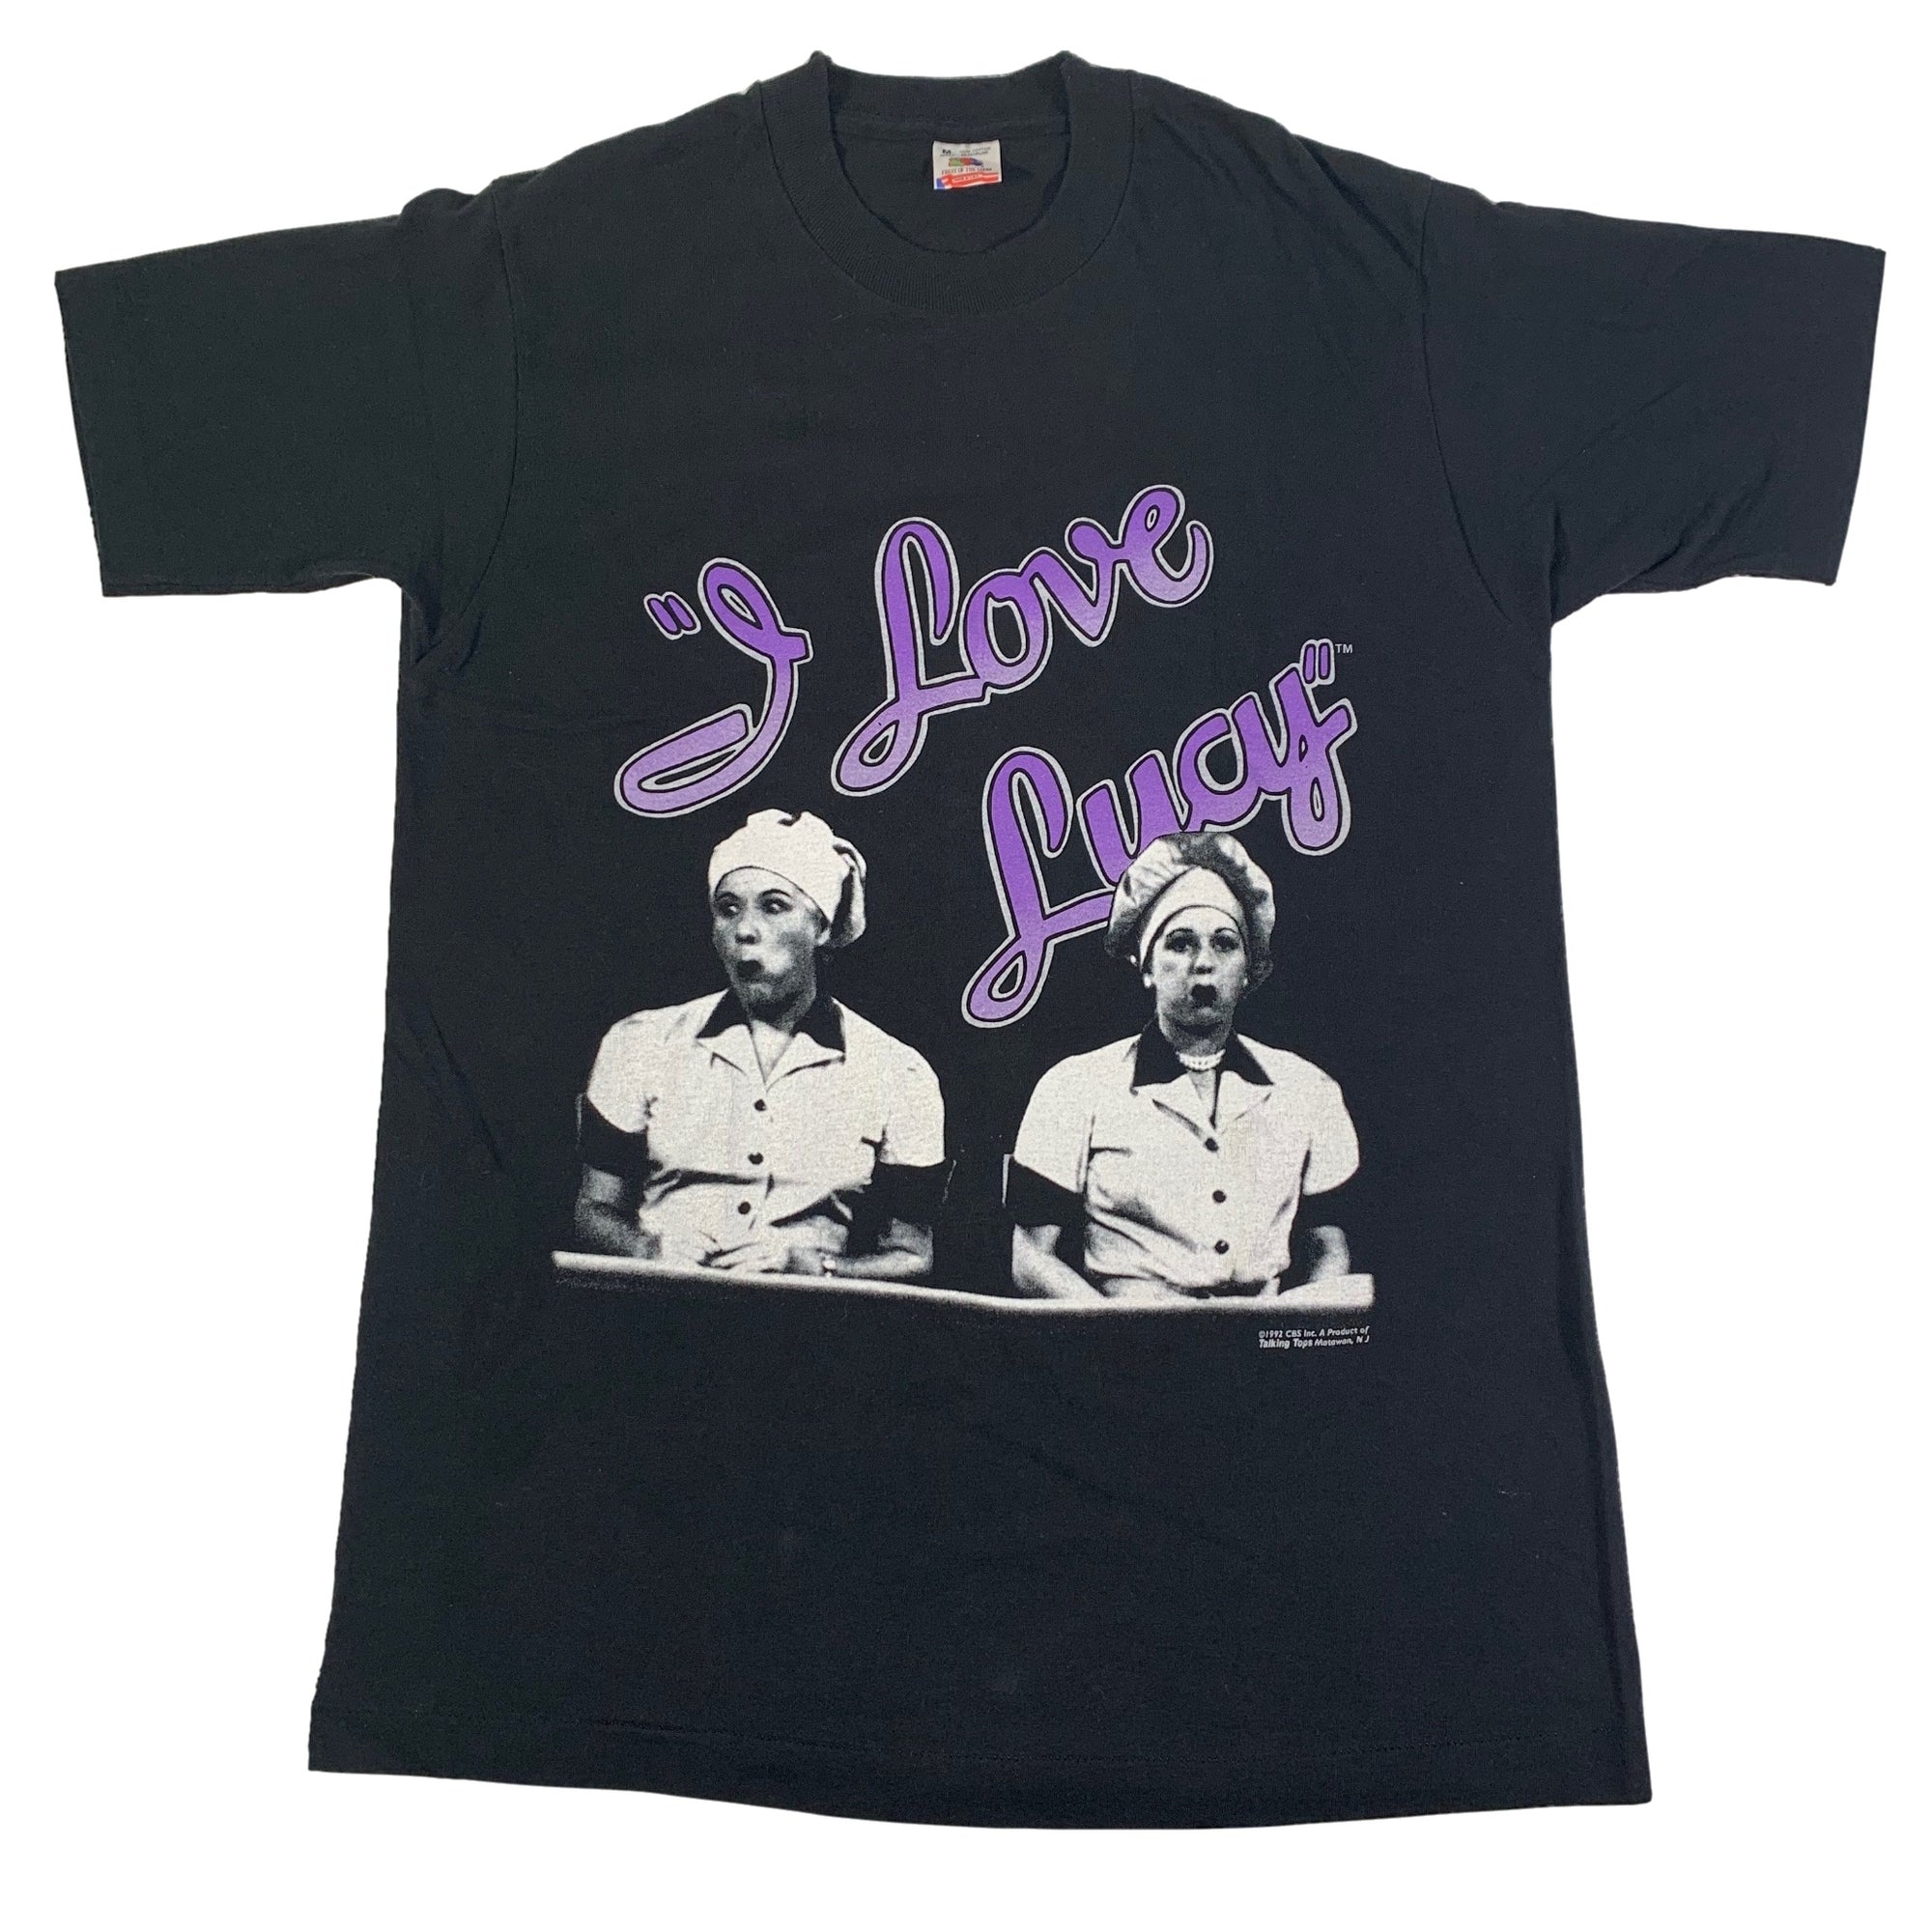 Vintage I Love Lucy "Job Switching" T-Shirt - jointcustodydc